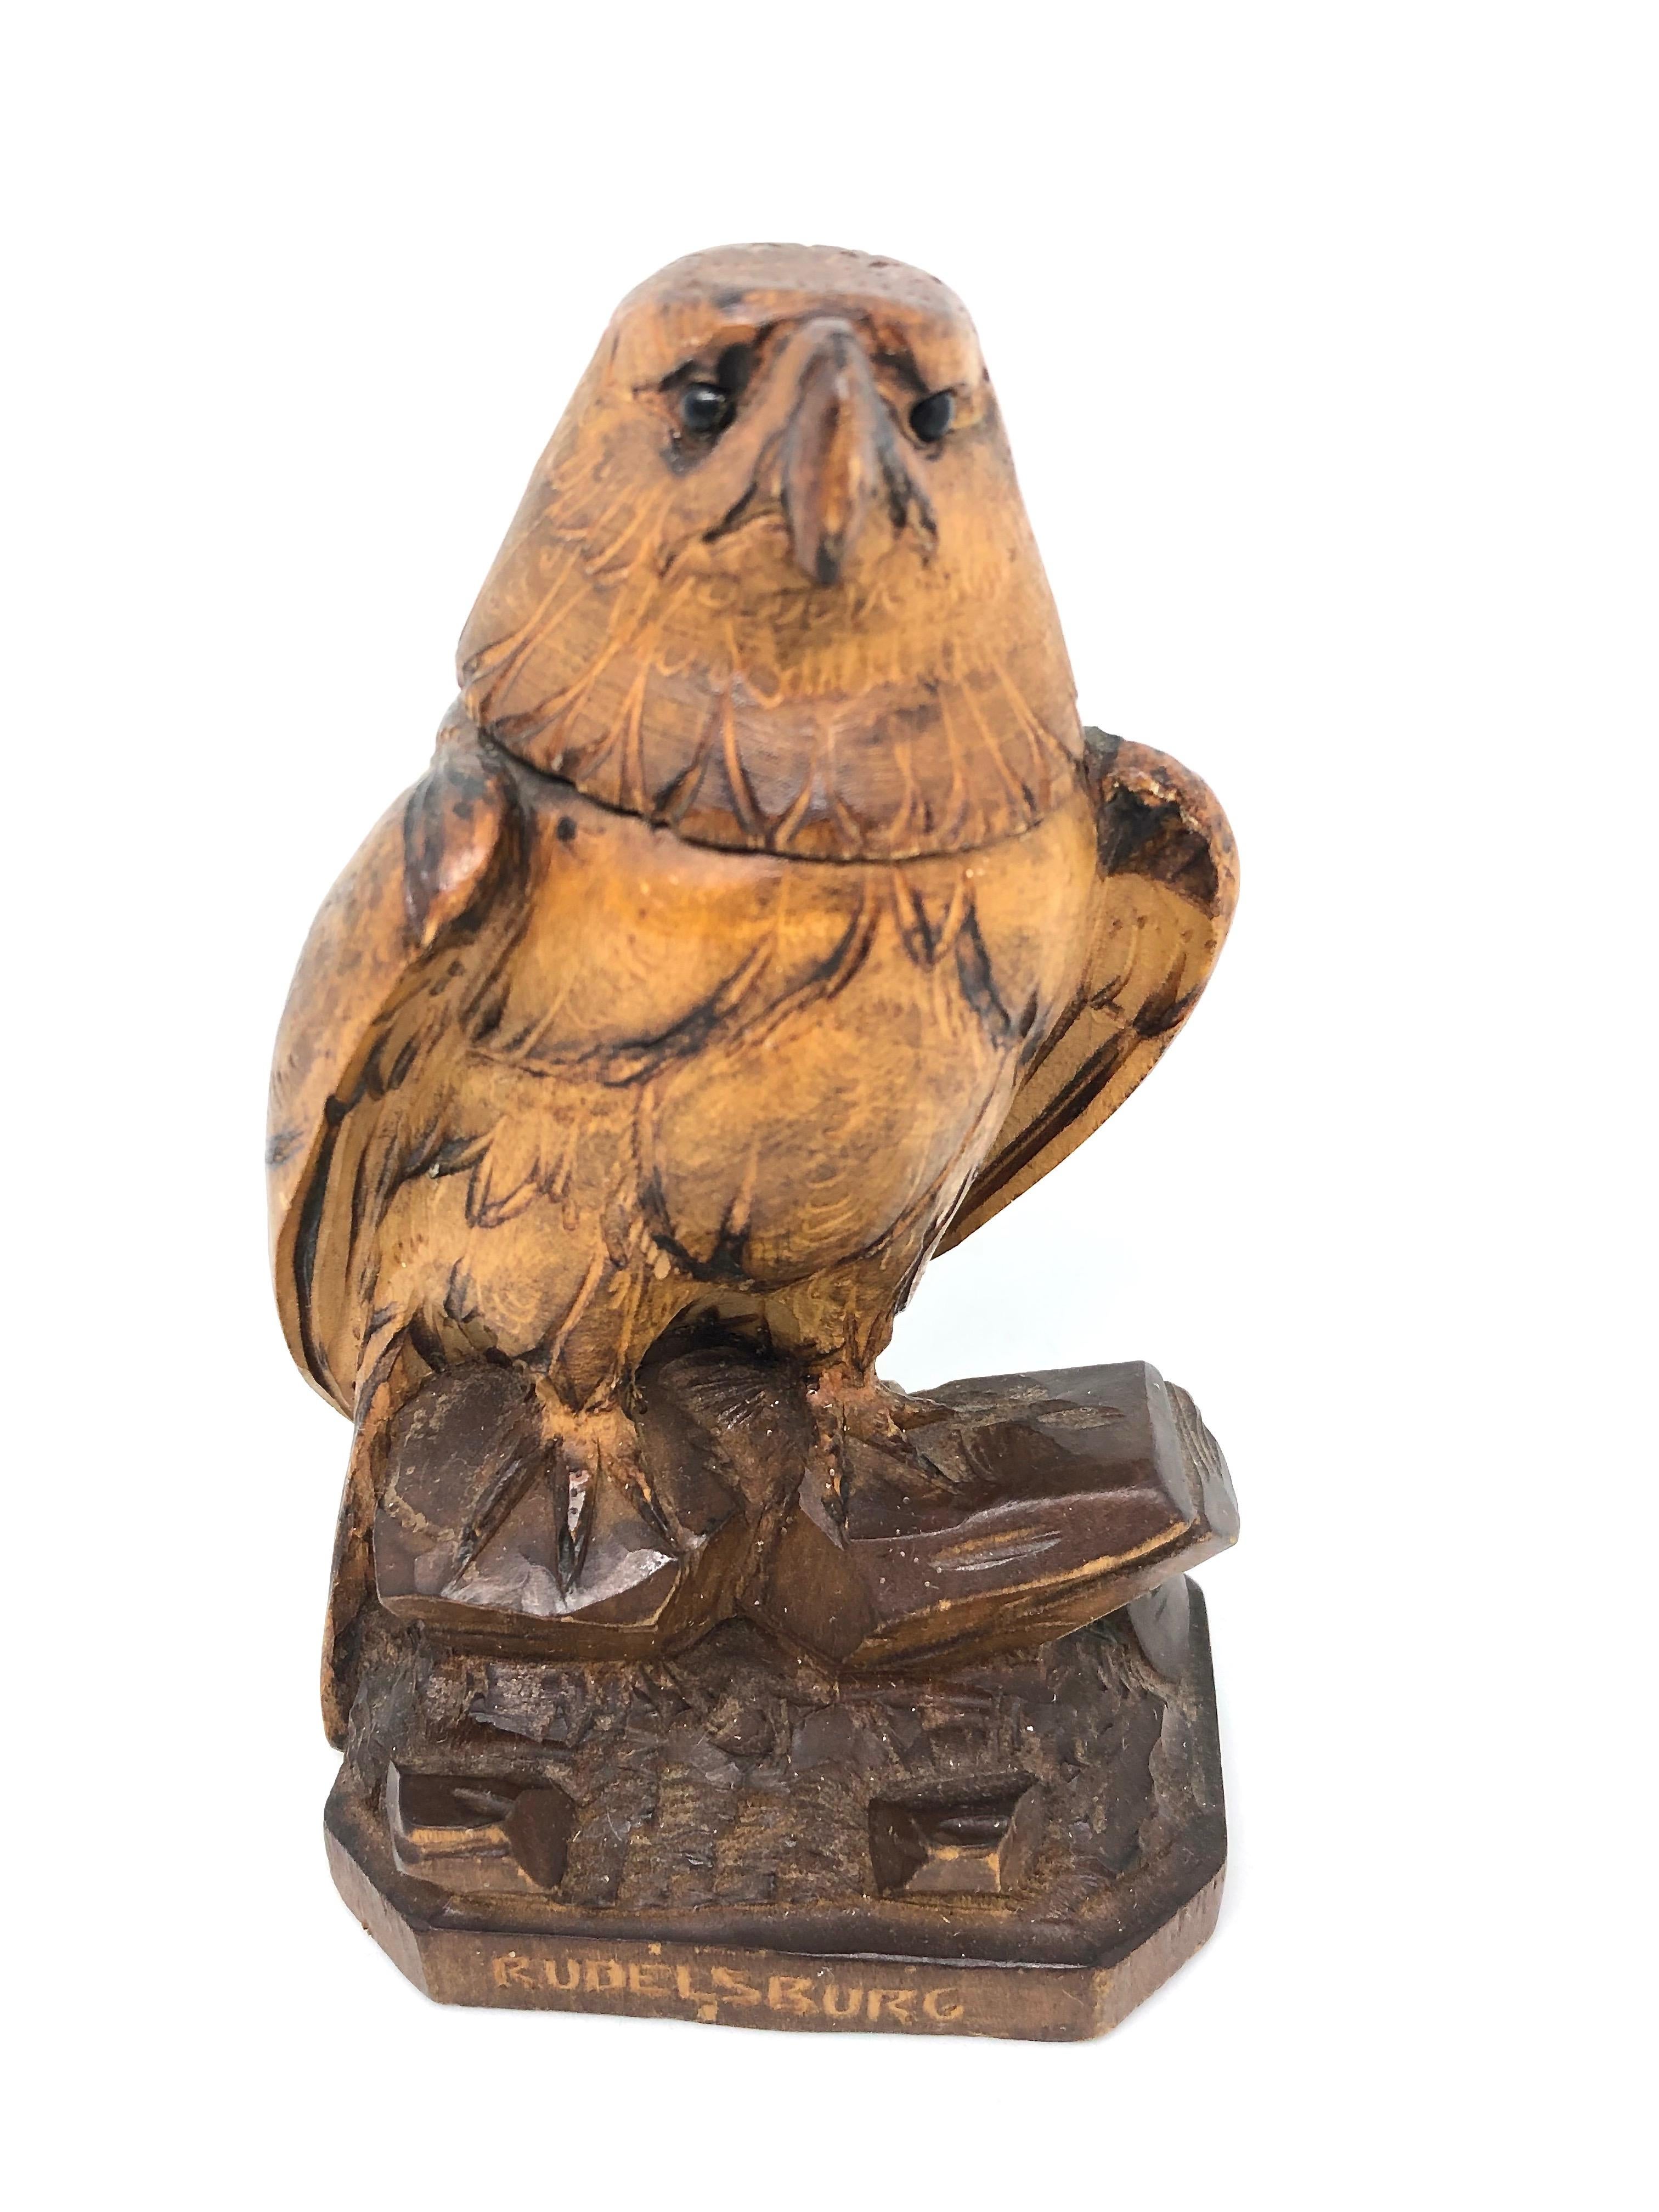 Classic early 1900s black forest Brienz wood carved inkwell in form of an Eagle. Nice addition to your room or just for use it on your desk. Made of hand carved wood and glass eyes. Marked with a blemish, the porcelain insert for the ink is missing.